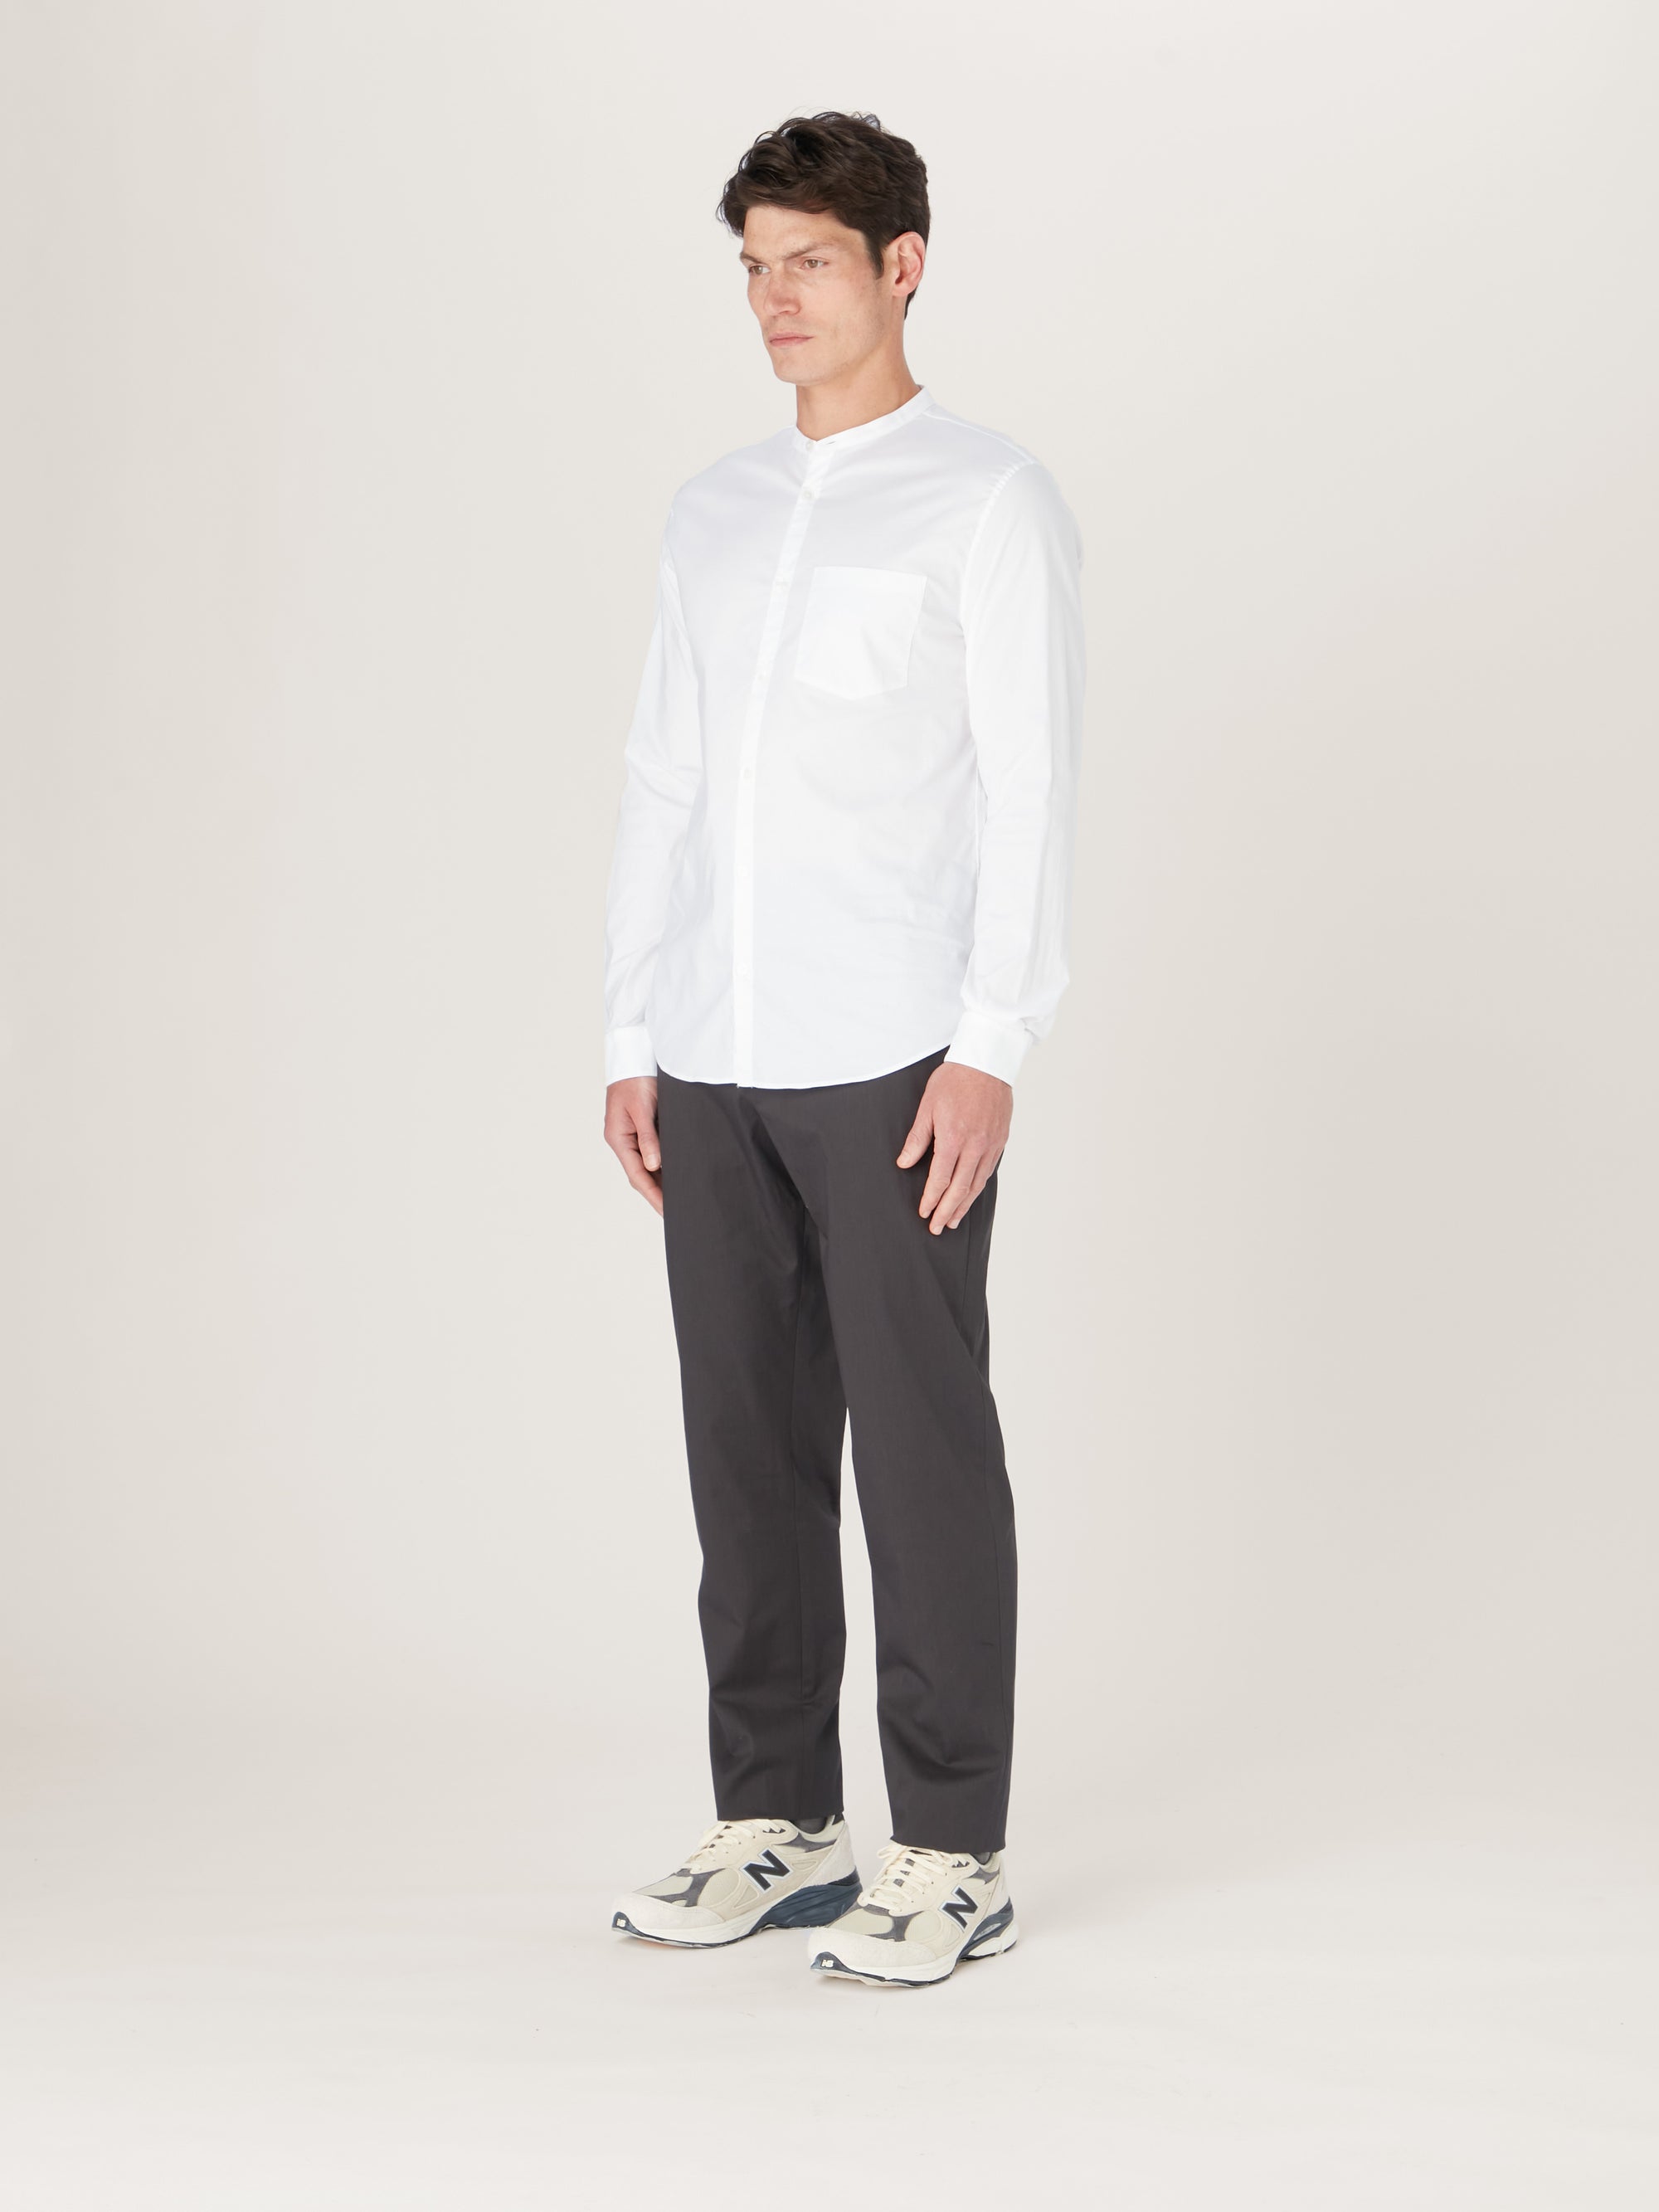 The All Day Shirt || White | Pinpoint Cotton